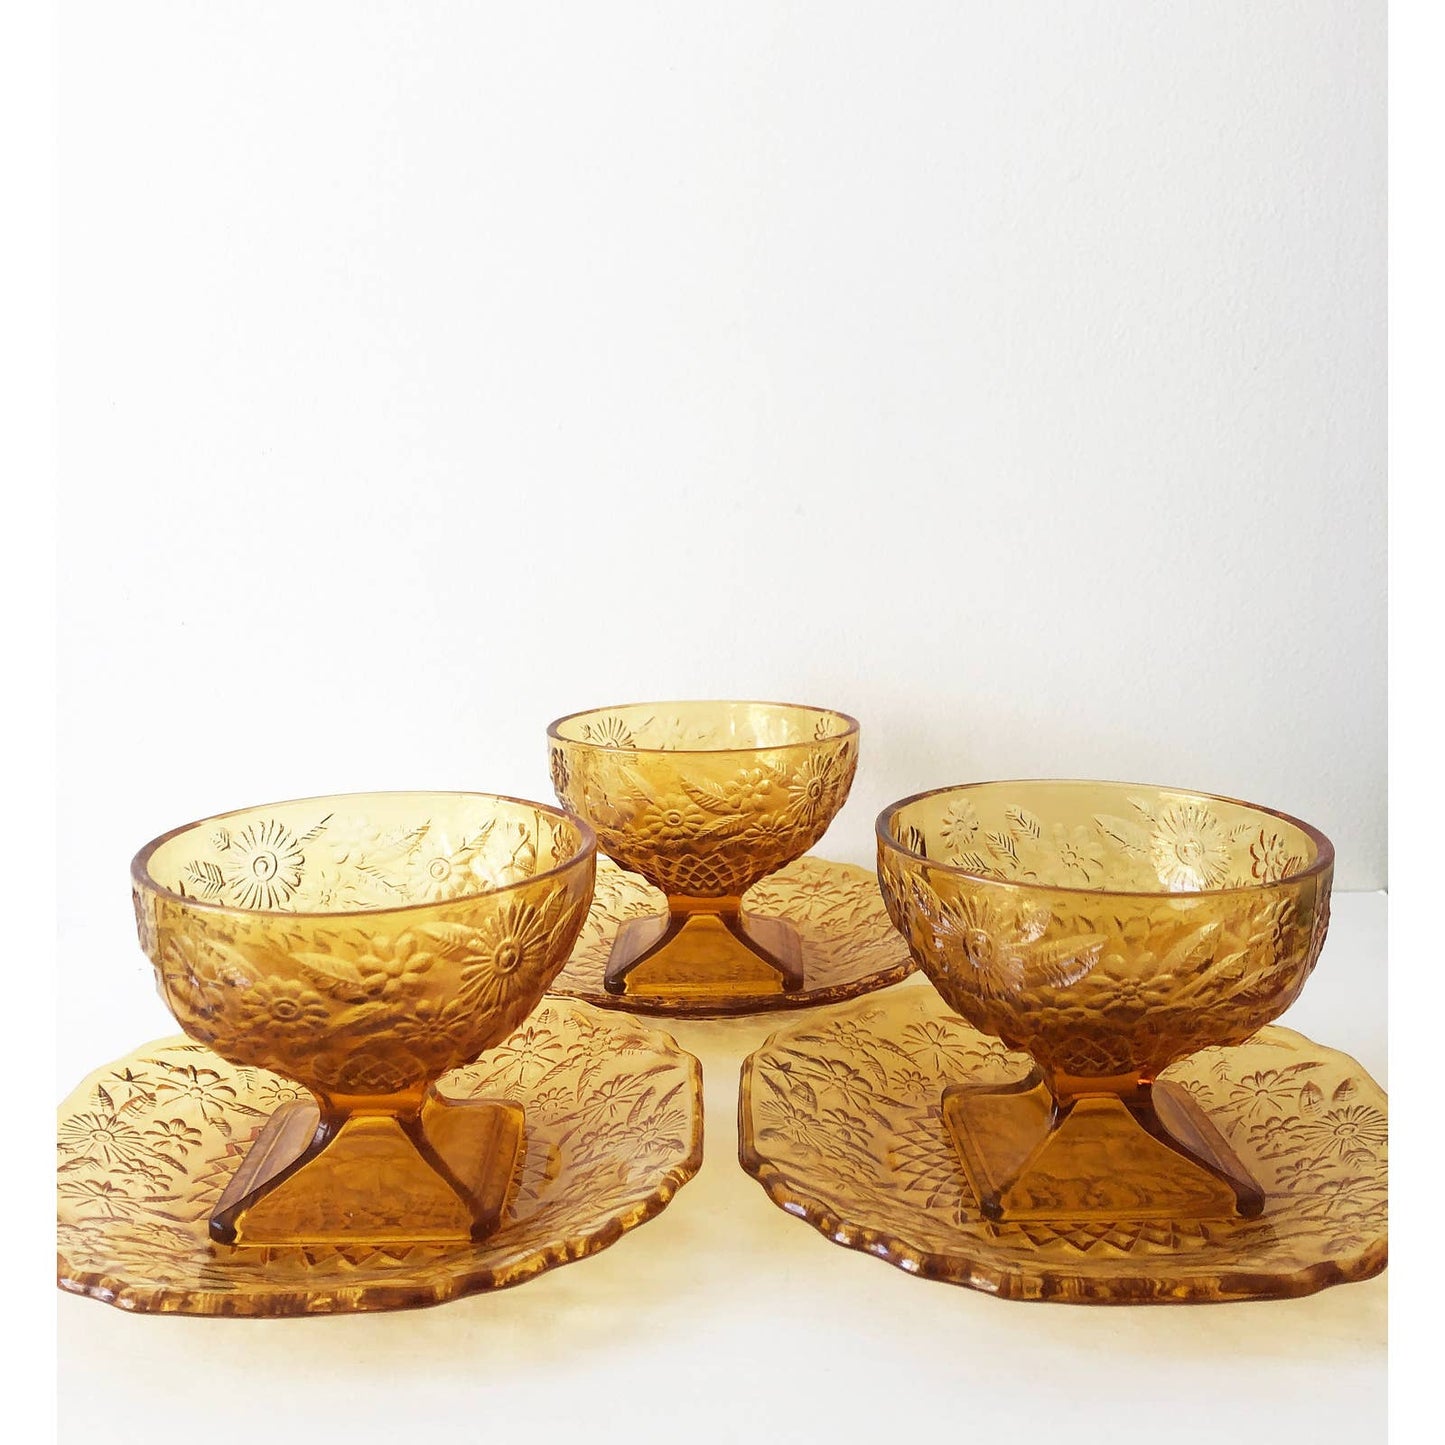 Vintage Amber Glassware Cups and Saucer